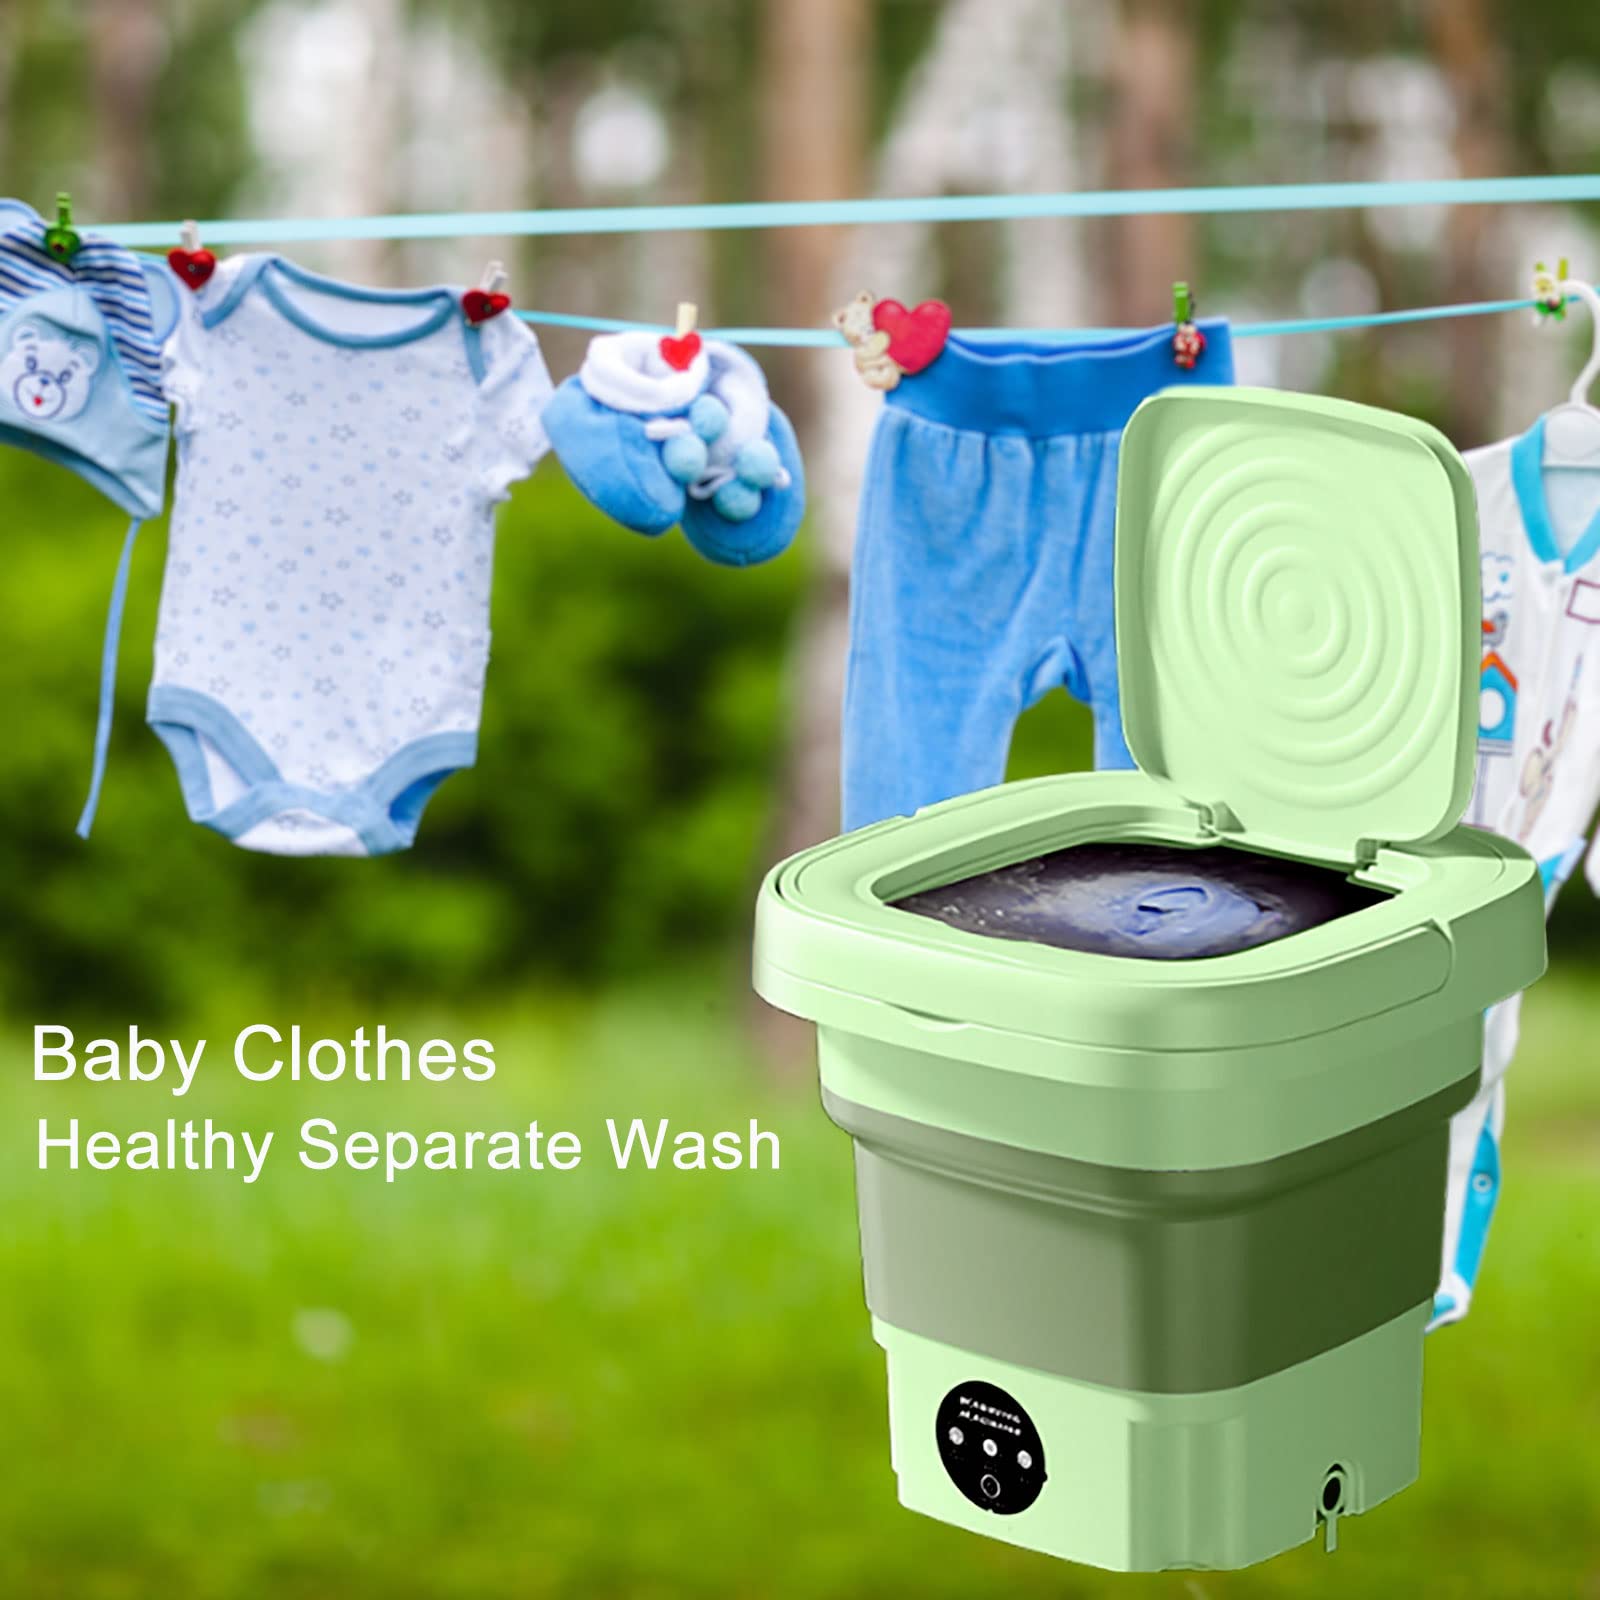 Portable Washing Machine,Mini Washer Suitable for Washing Small Pieces of Clothing, Baby Clothes,Underwear,Socks,Portable Washer Machine for Apartments, Dormitories, Camping,RV and More